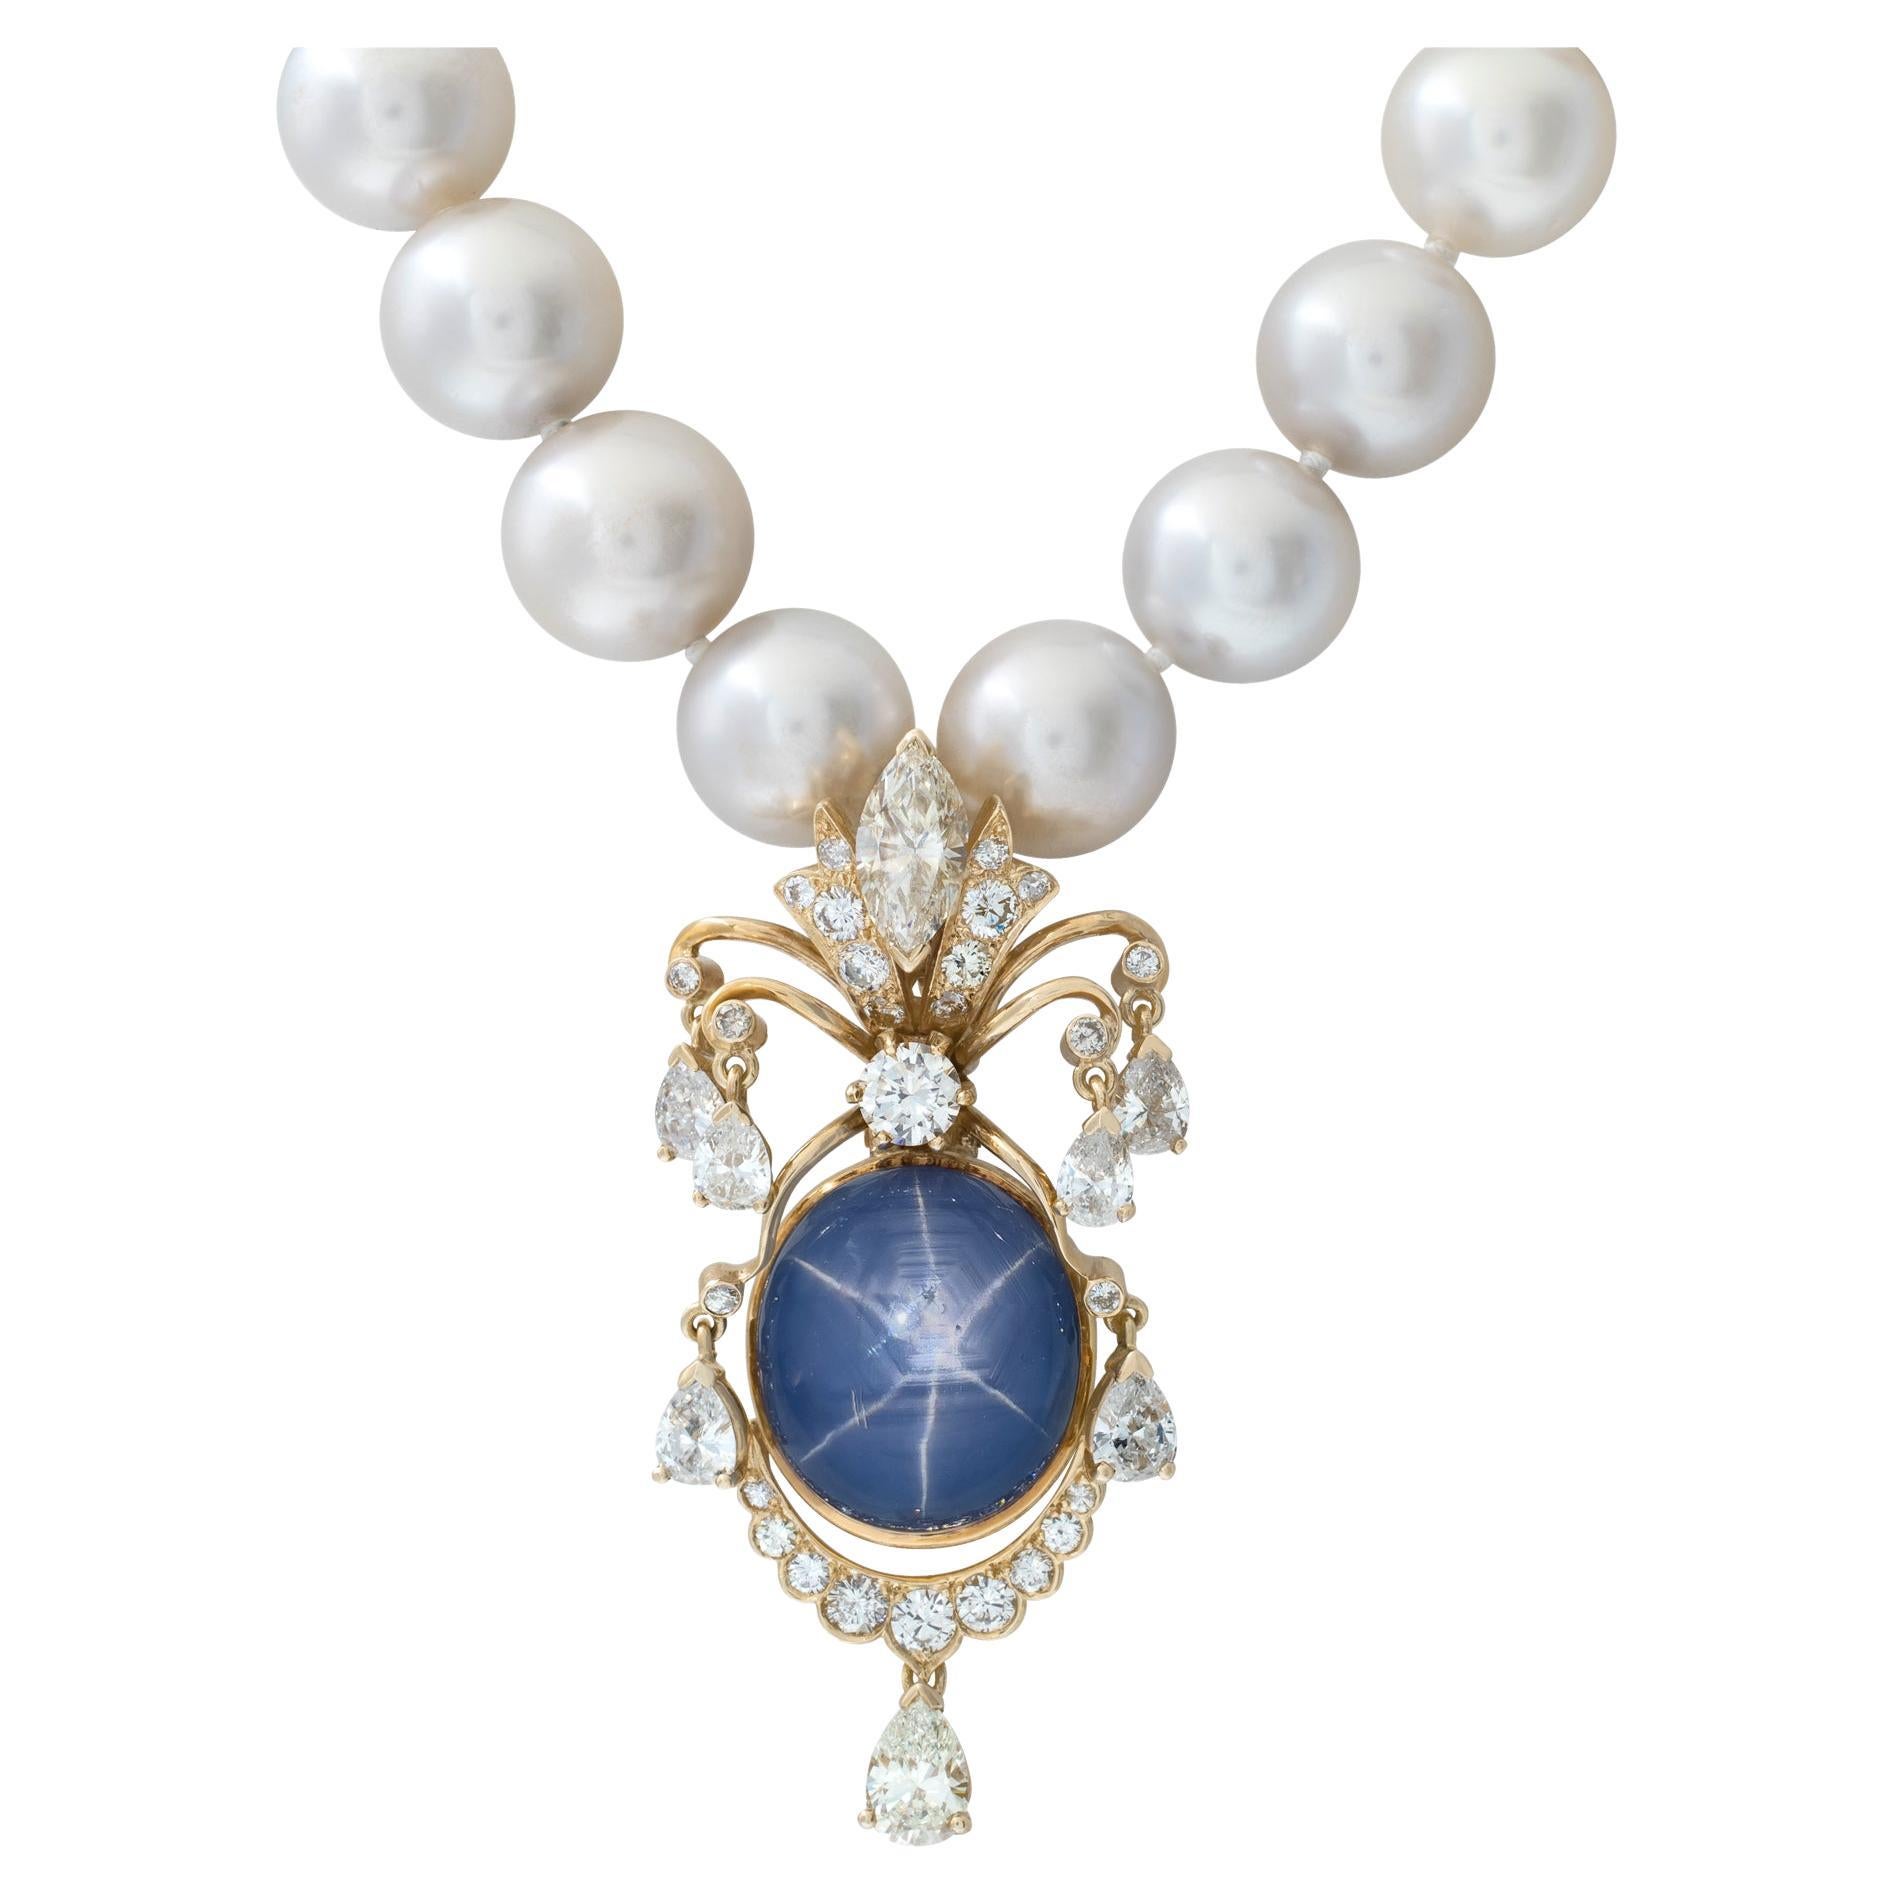 Graduating South Sea Pearl Necklace with Cabochon Star Sapphire & Diamonds 